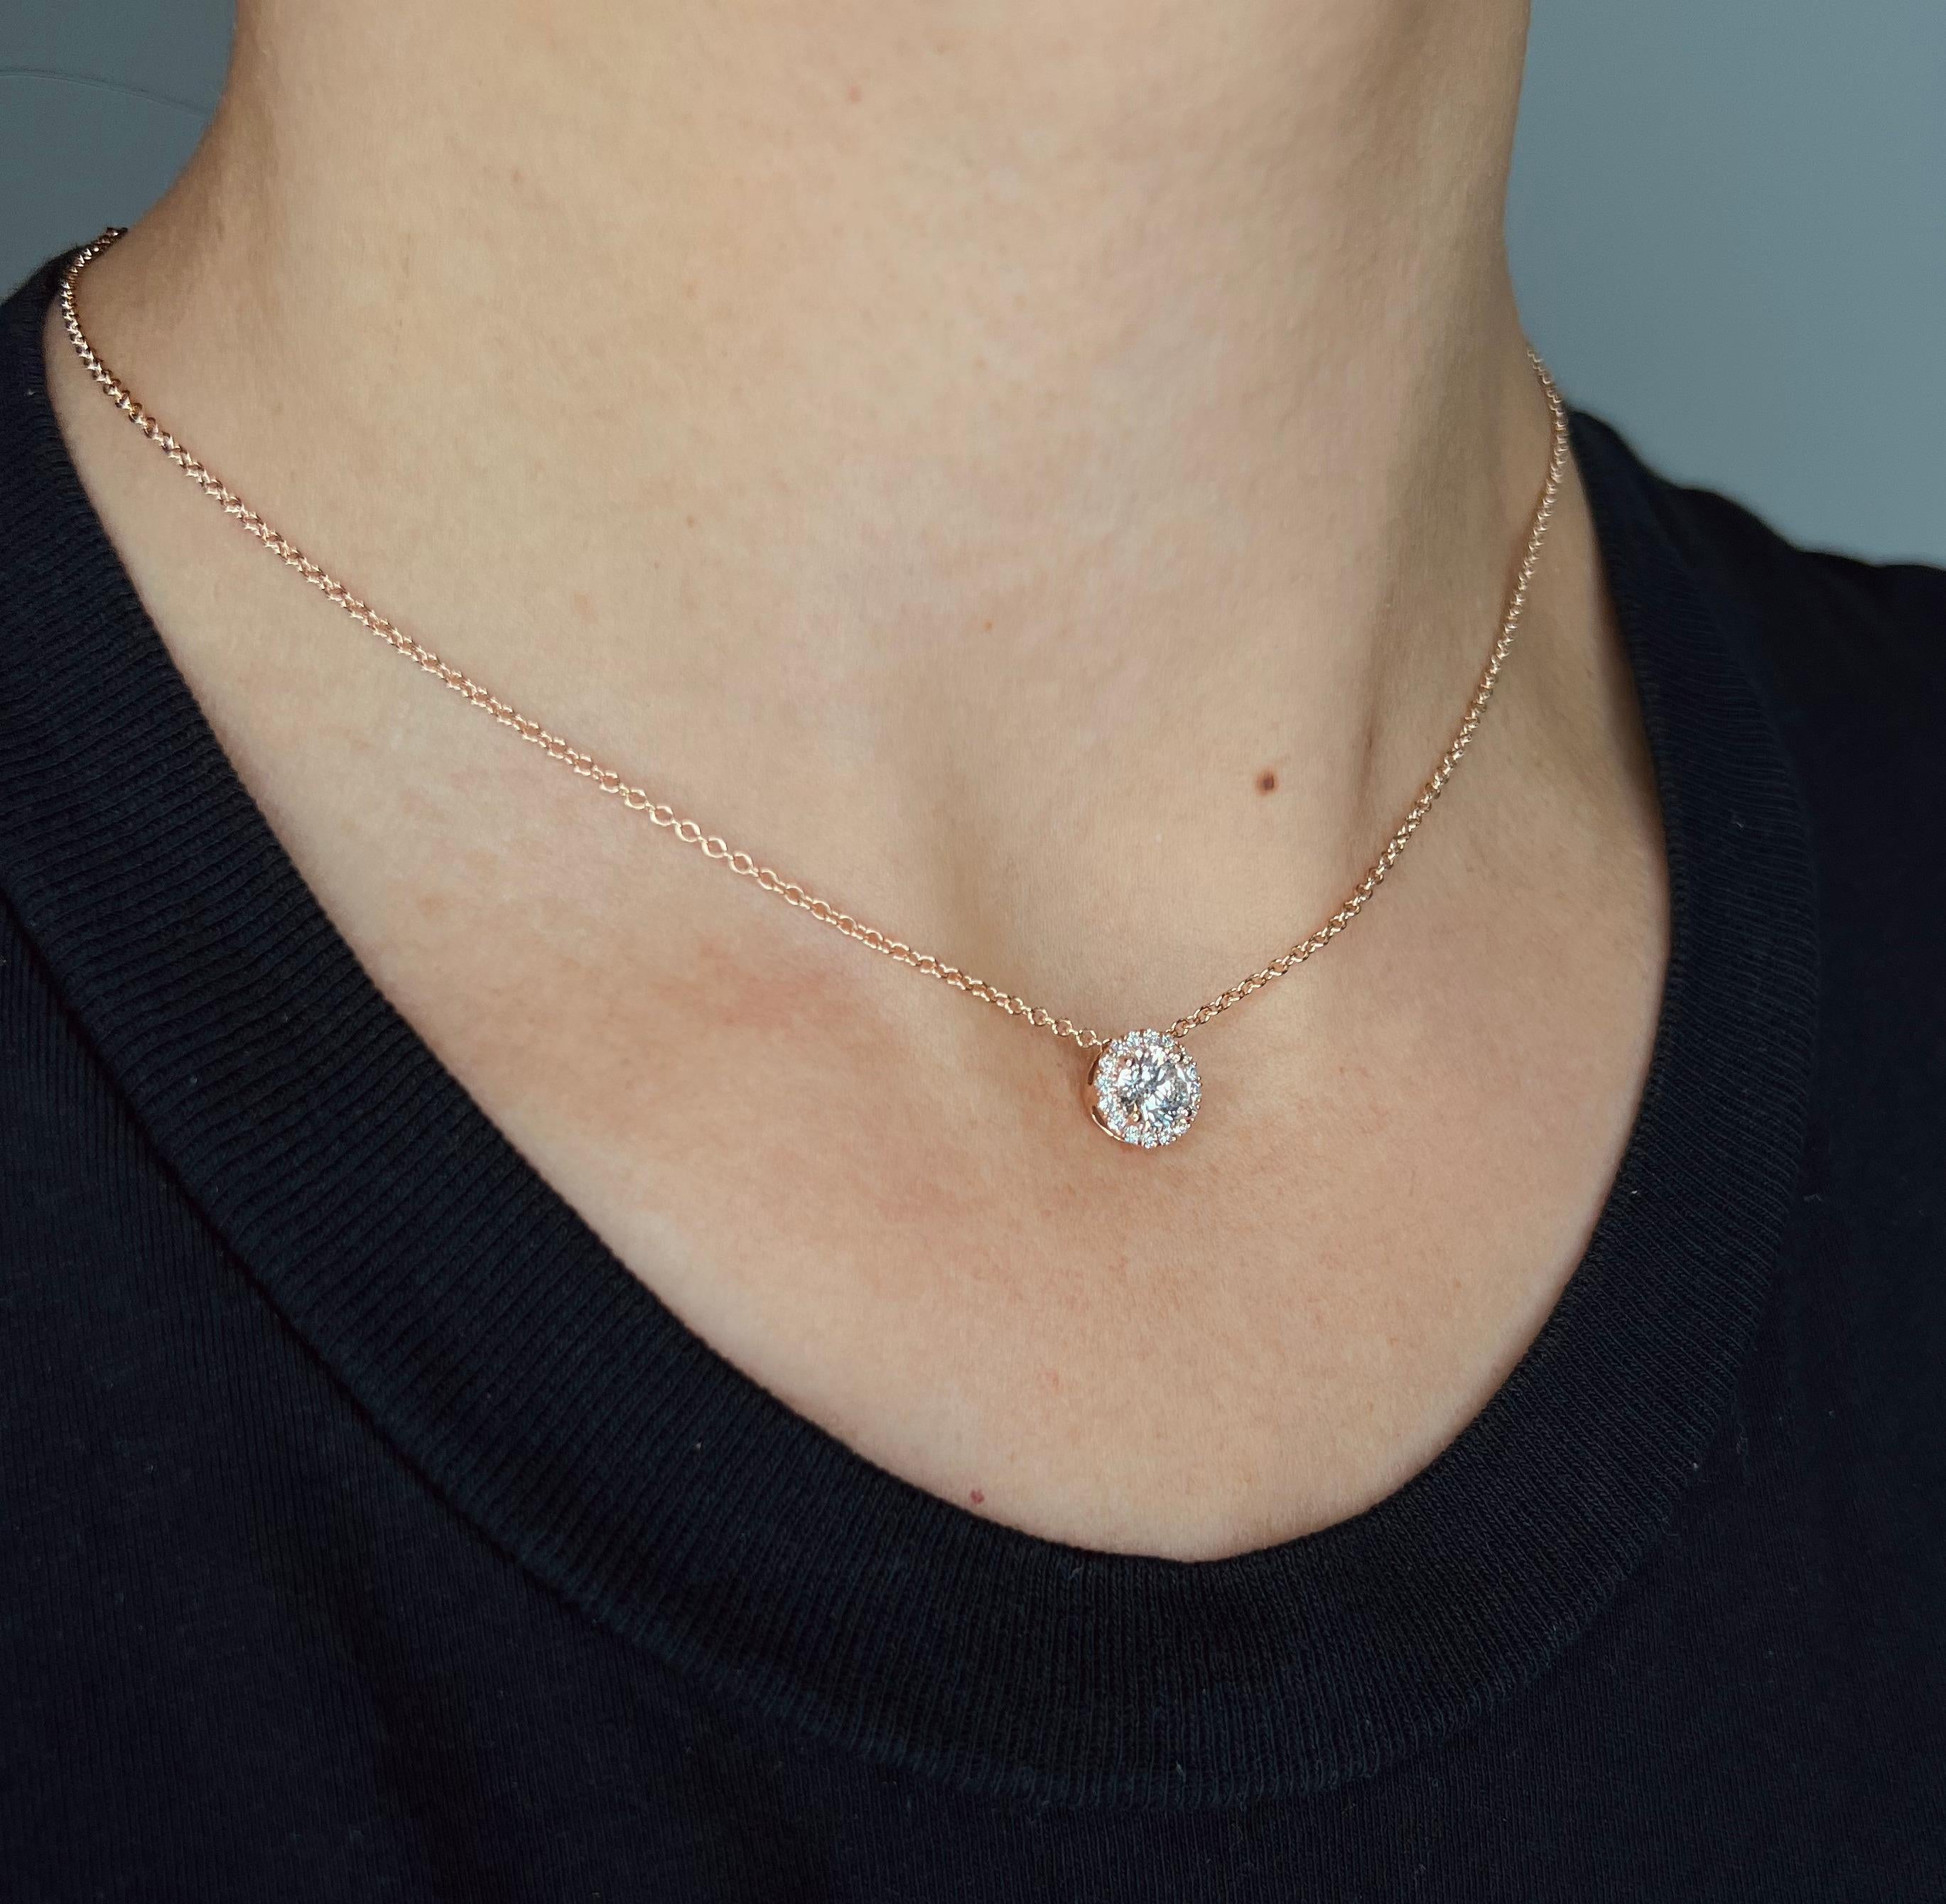 This diamond circle pendant provides a glowing chic look.
Metal: 14k Gold
Diamond Total Carats (Includes 0.15ct halo): 0.40 Total (.25ct Center)
Diamond Cut: Round Natural Diamonds (Not Lab Grown)
Diamond Clarity: VS
Diamond Color: F-G
Color: White